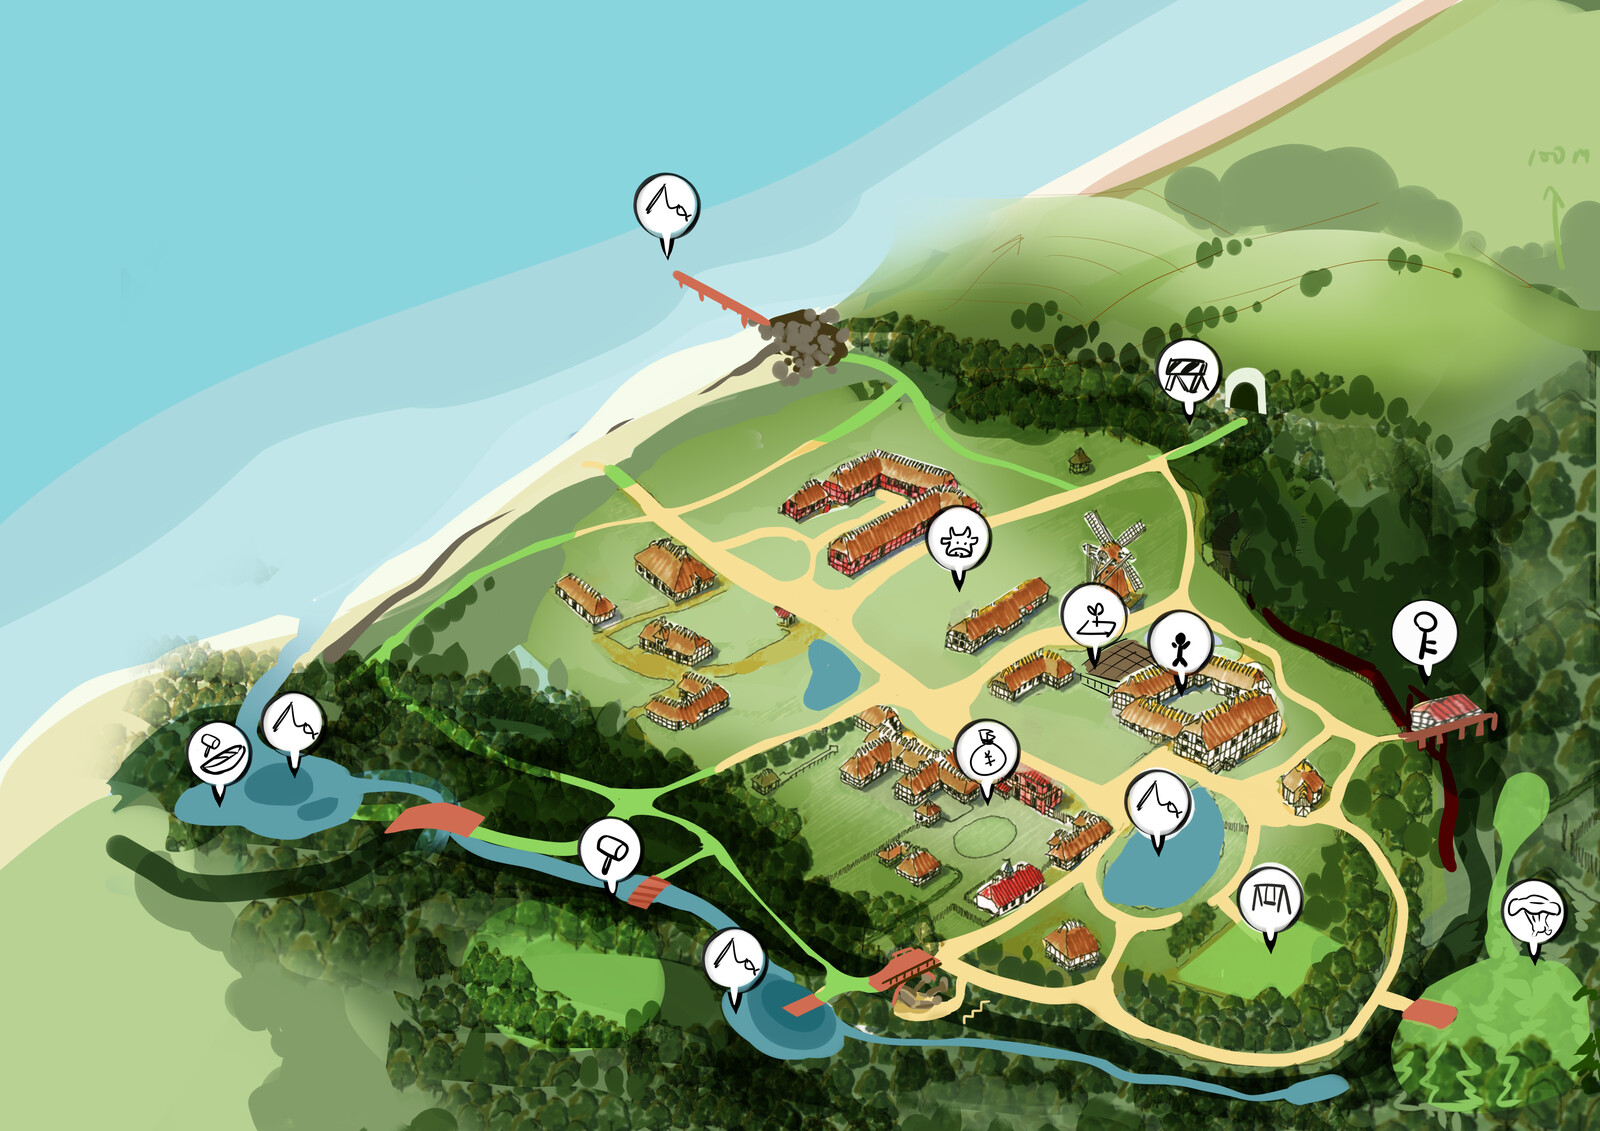 The map of the village in our game, which is in accordance with the characteristics of the landscapes in southern Denmark.